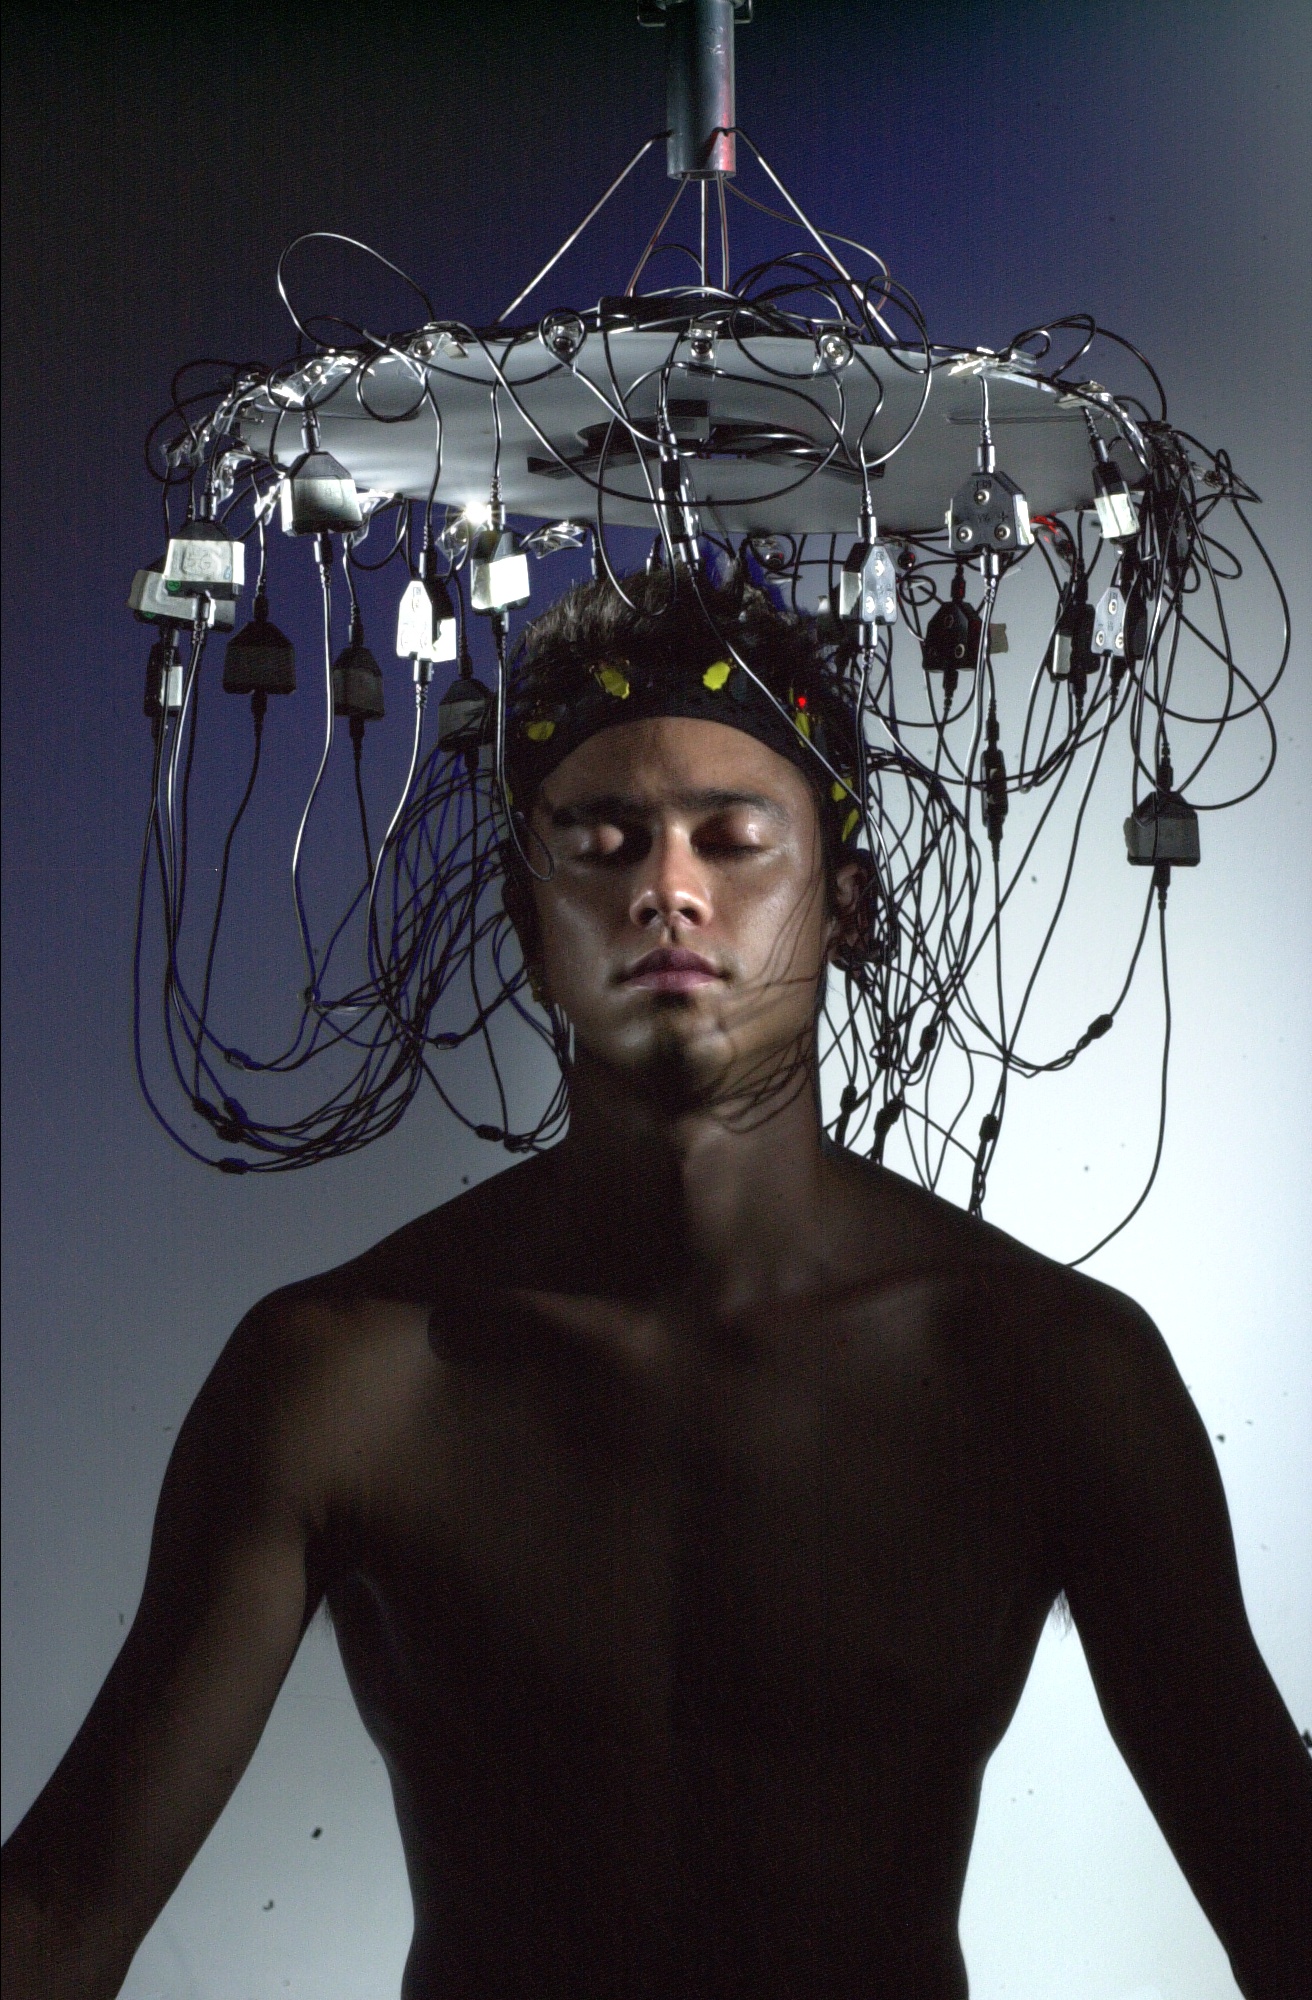 EEG used during a music performance in which bathers from around the world were networked together as part of a collective musical performance, using their brainwaves to control sound, lighting, and the bath environment